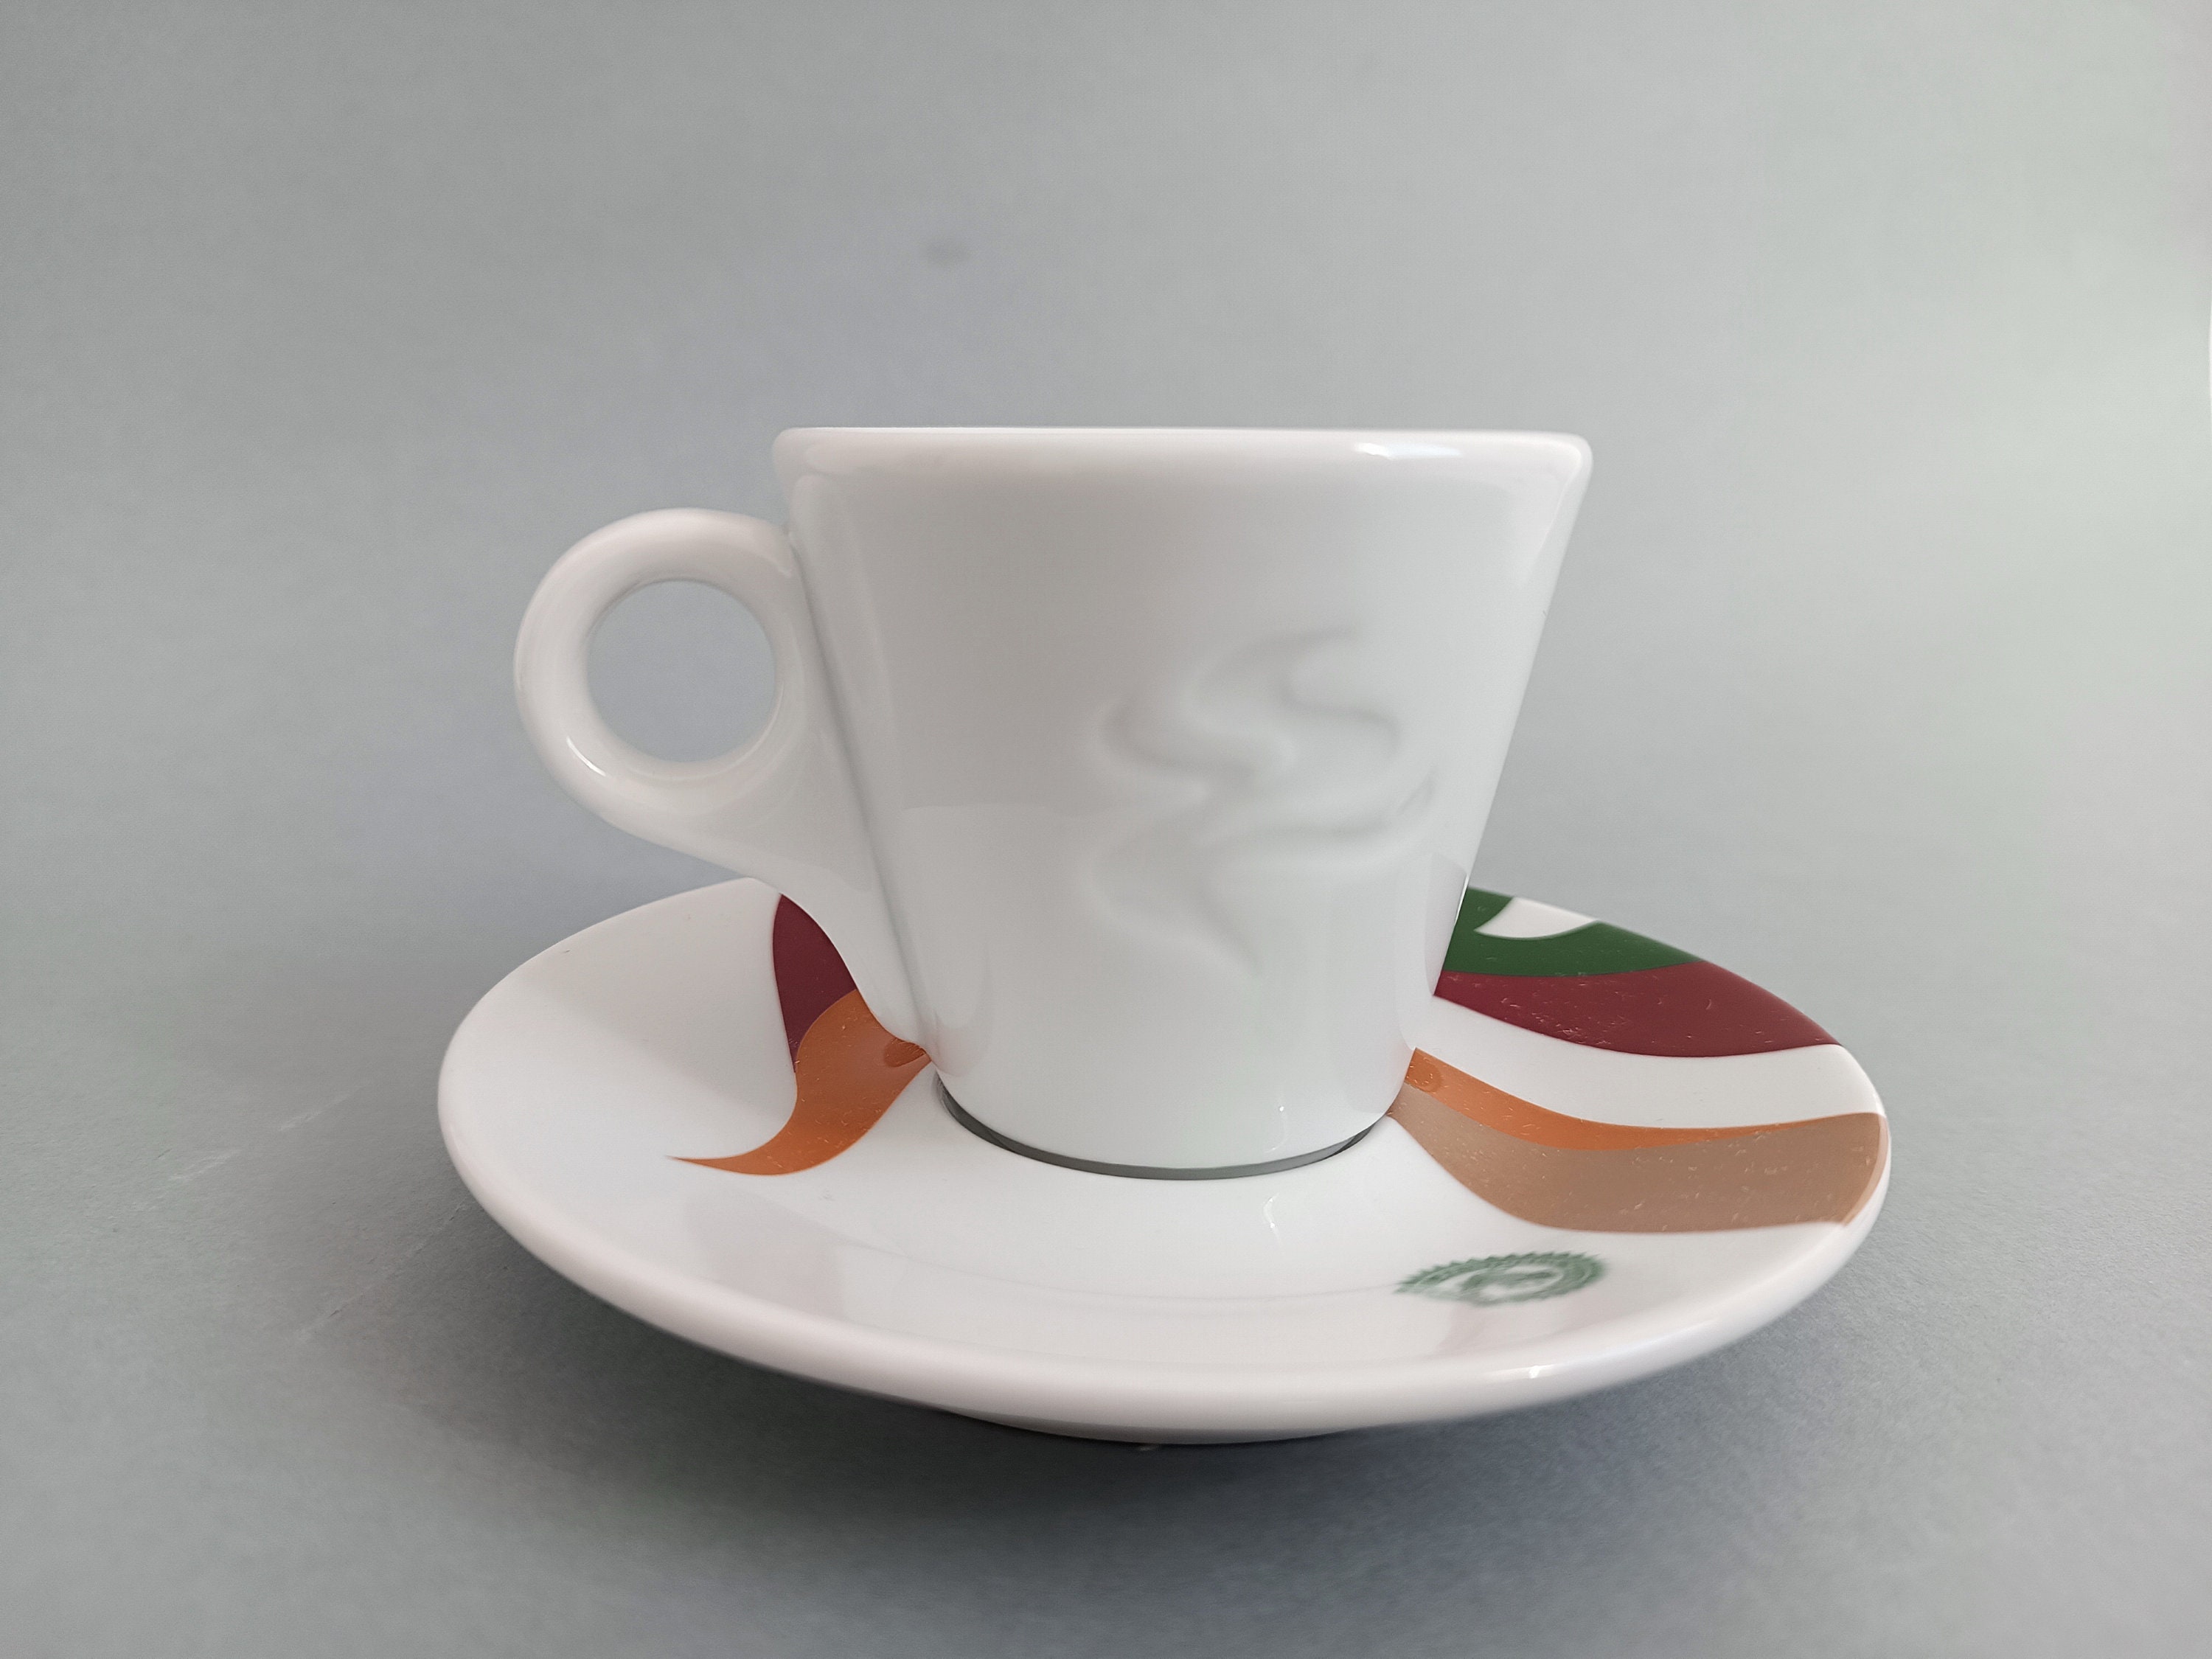 Collectible Vintage Heavy White Porcelain Bar Coffee Cup Branded Lavazza.  Classic Coffee Espresso Mug Made in Italy 